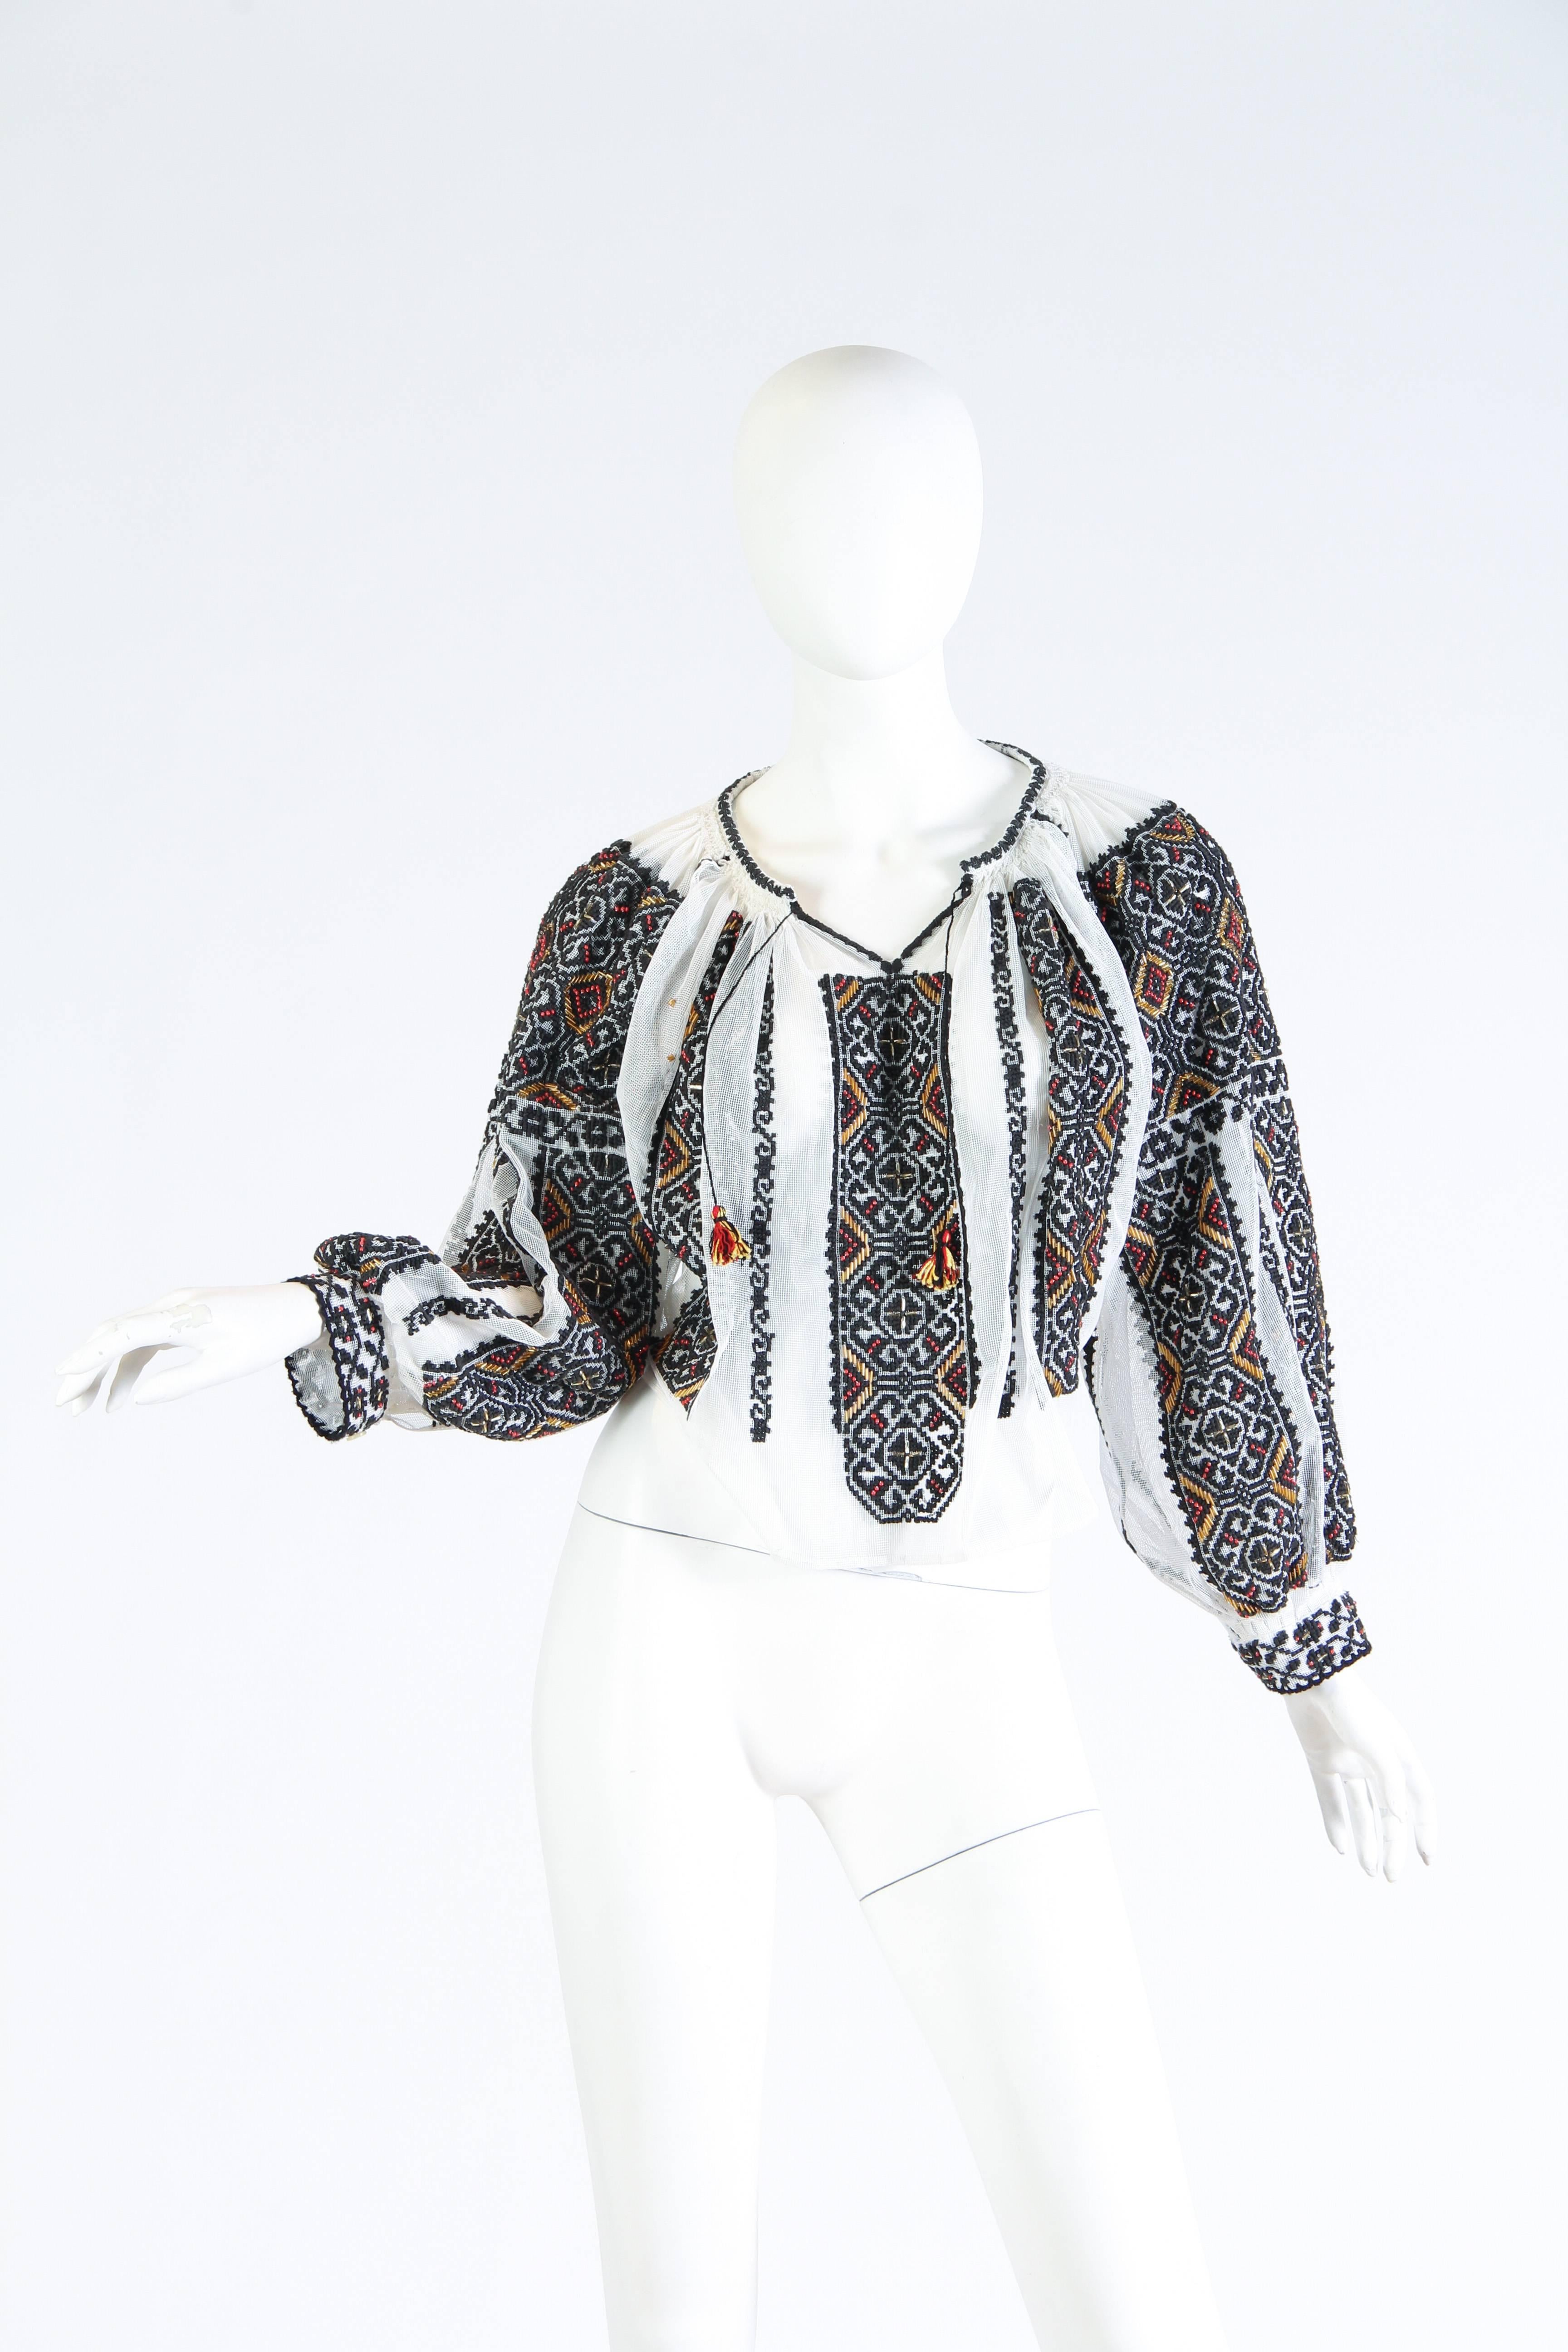 Dating from the mid century this Romanian blouse is perfection. The base material is a cotton net which has been painstakingly hand embroidered and beaded for days to achieve this level of embellishment. A rare gem in phenomenal condition. 